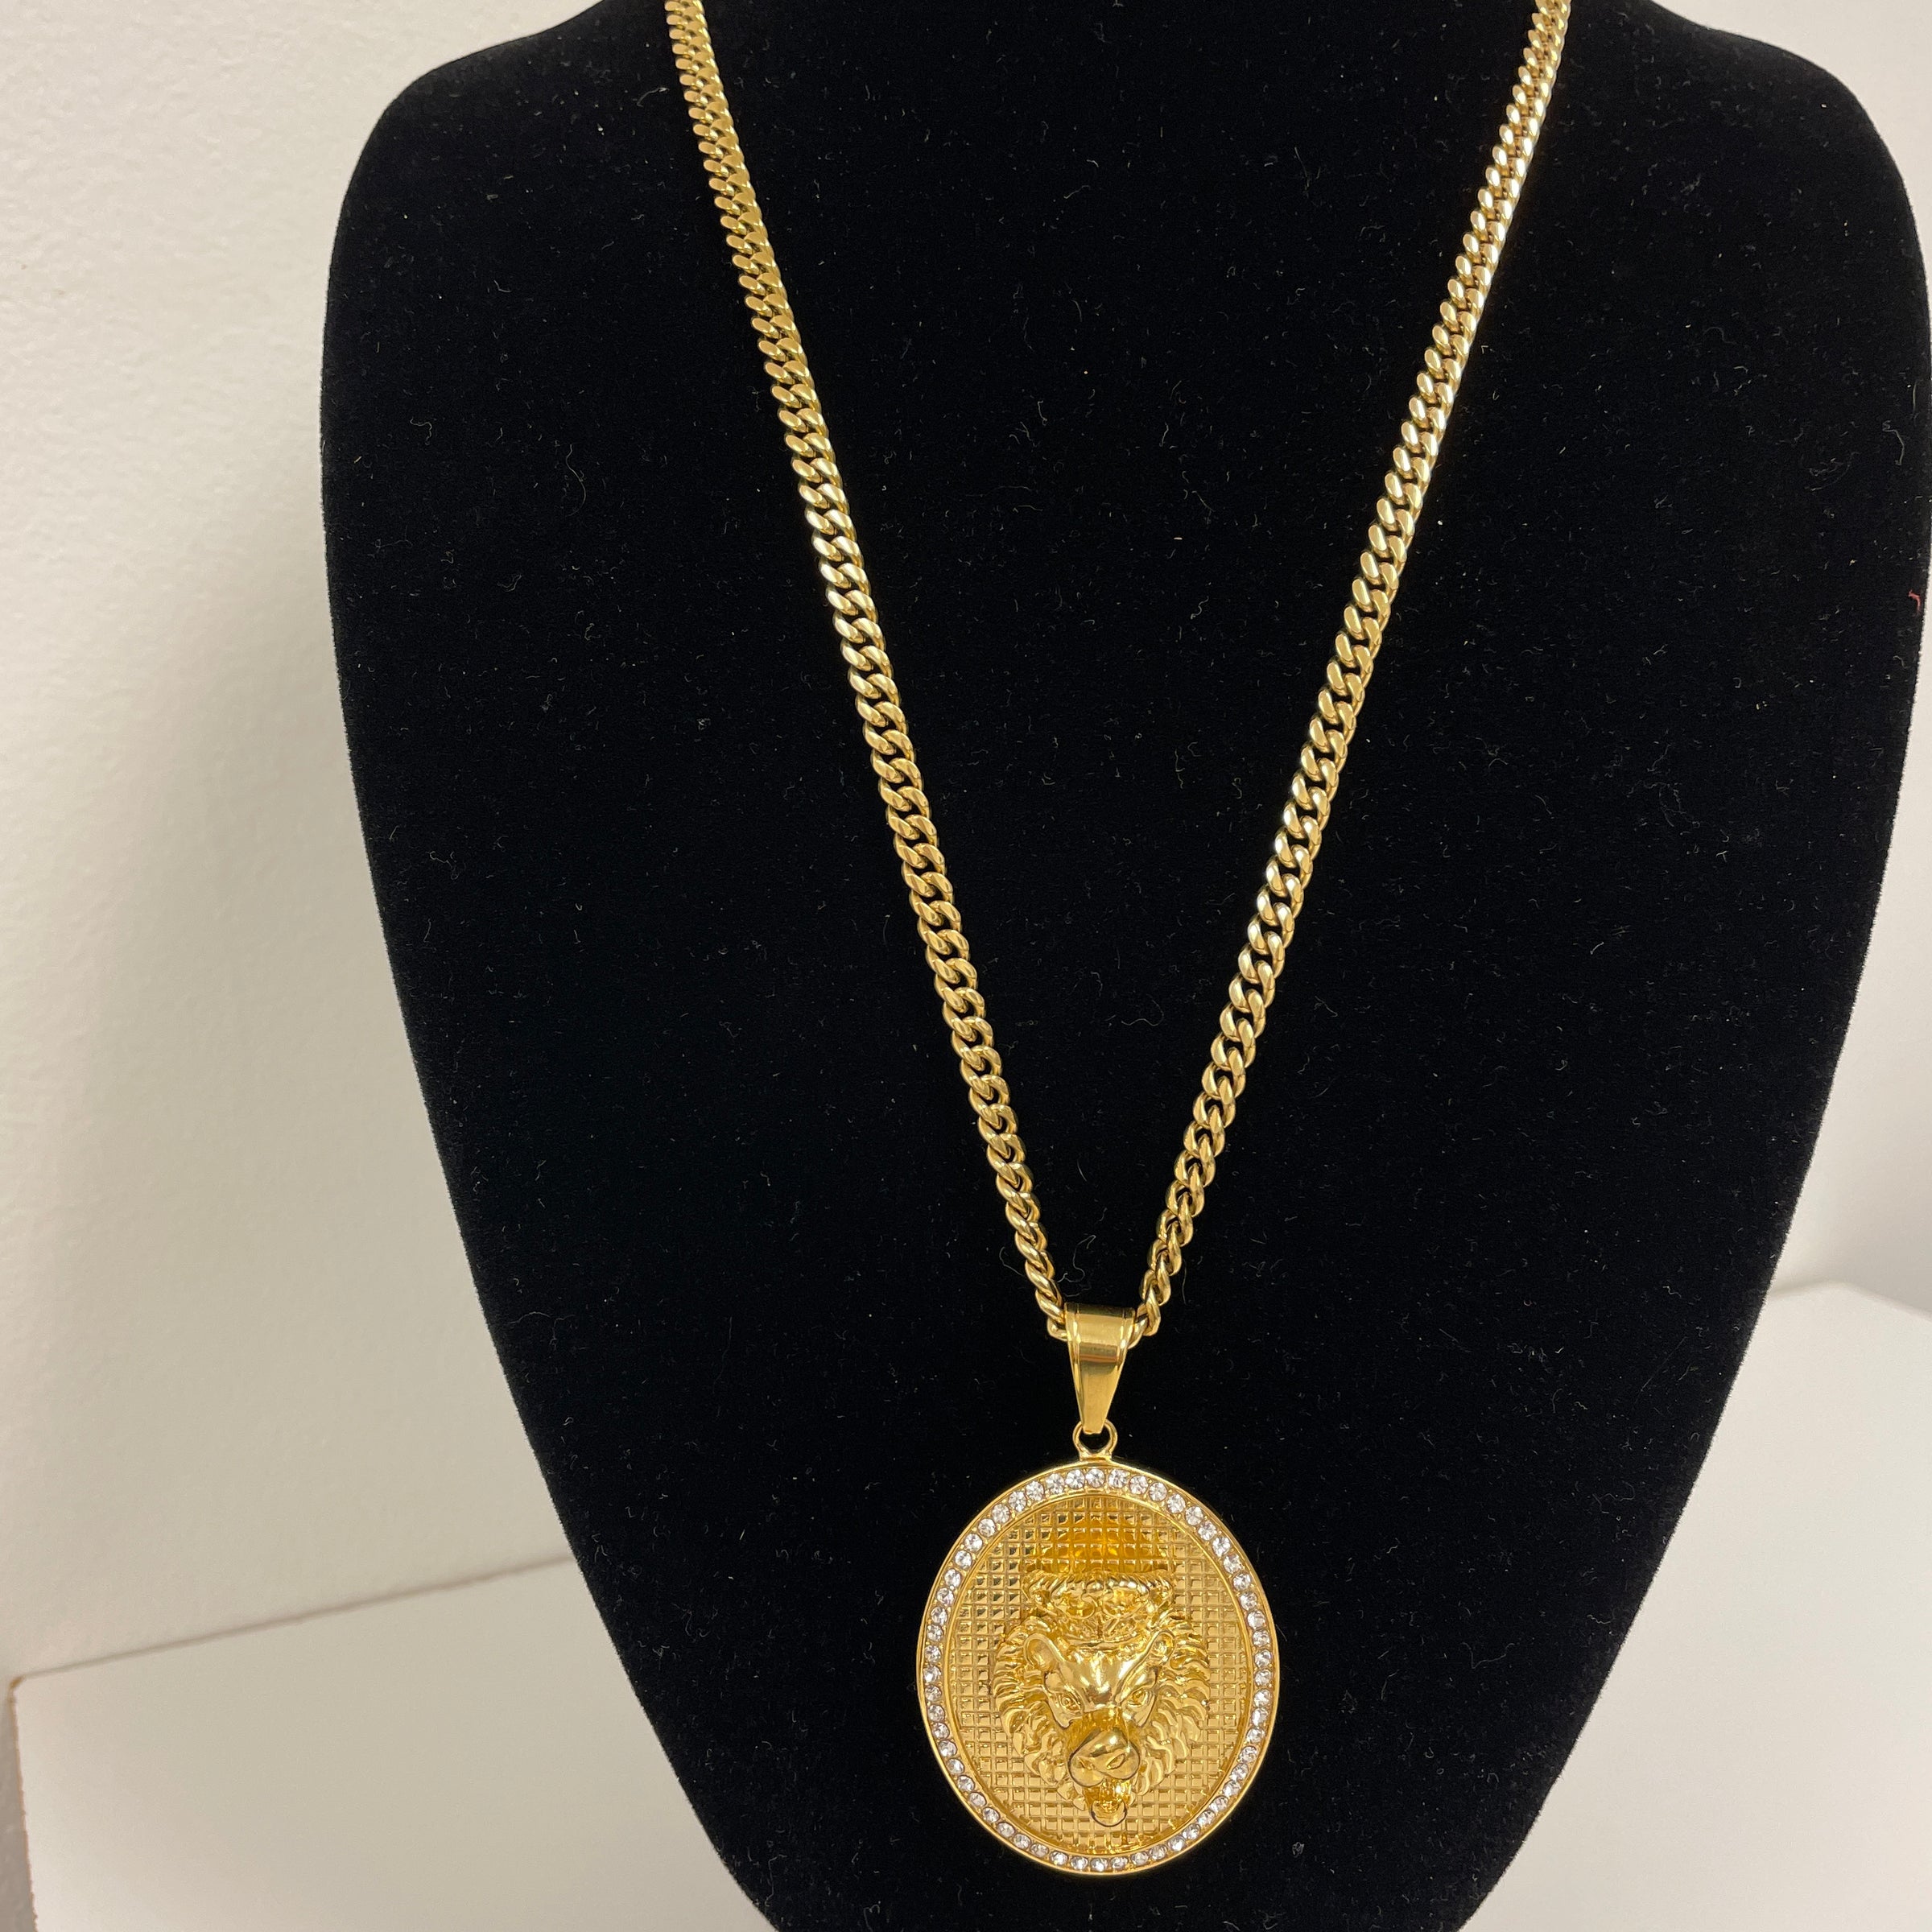 Lion Medallion Oval Pendant with 14K Gold Plated Cuban Link Necklace 5mm 24" Set